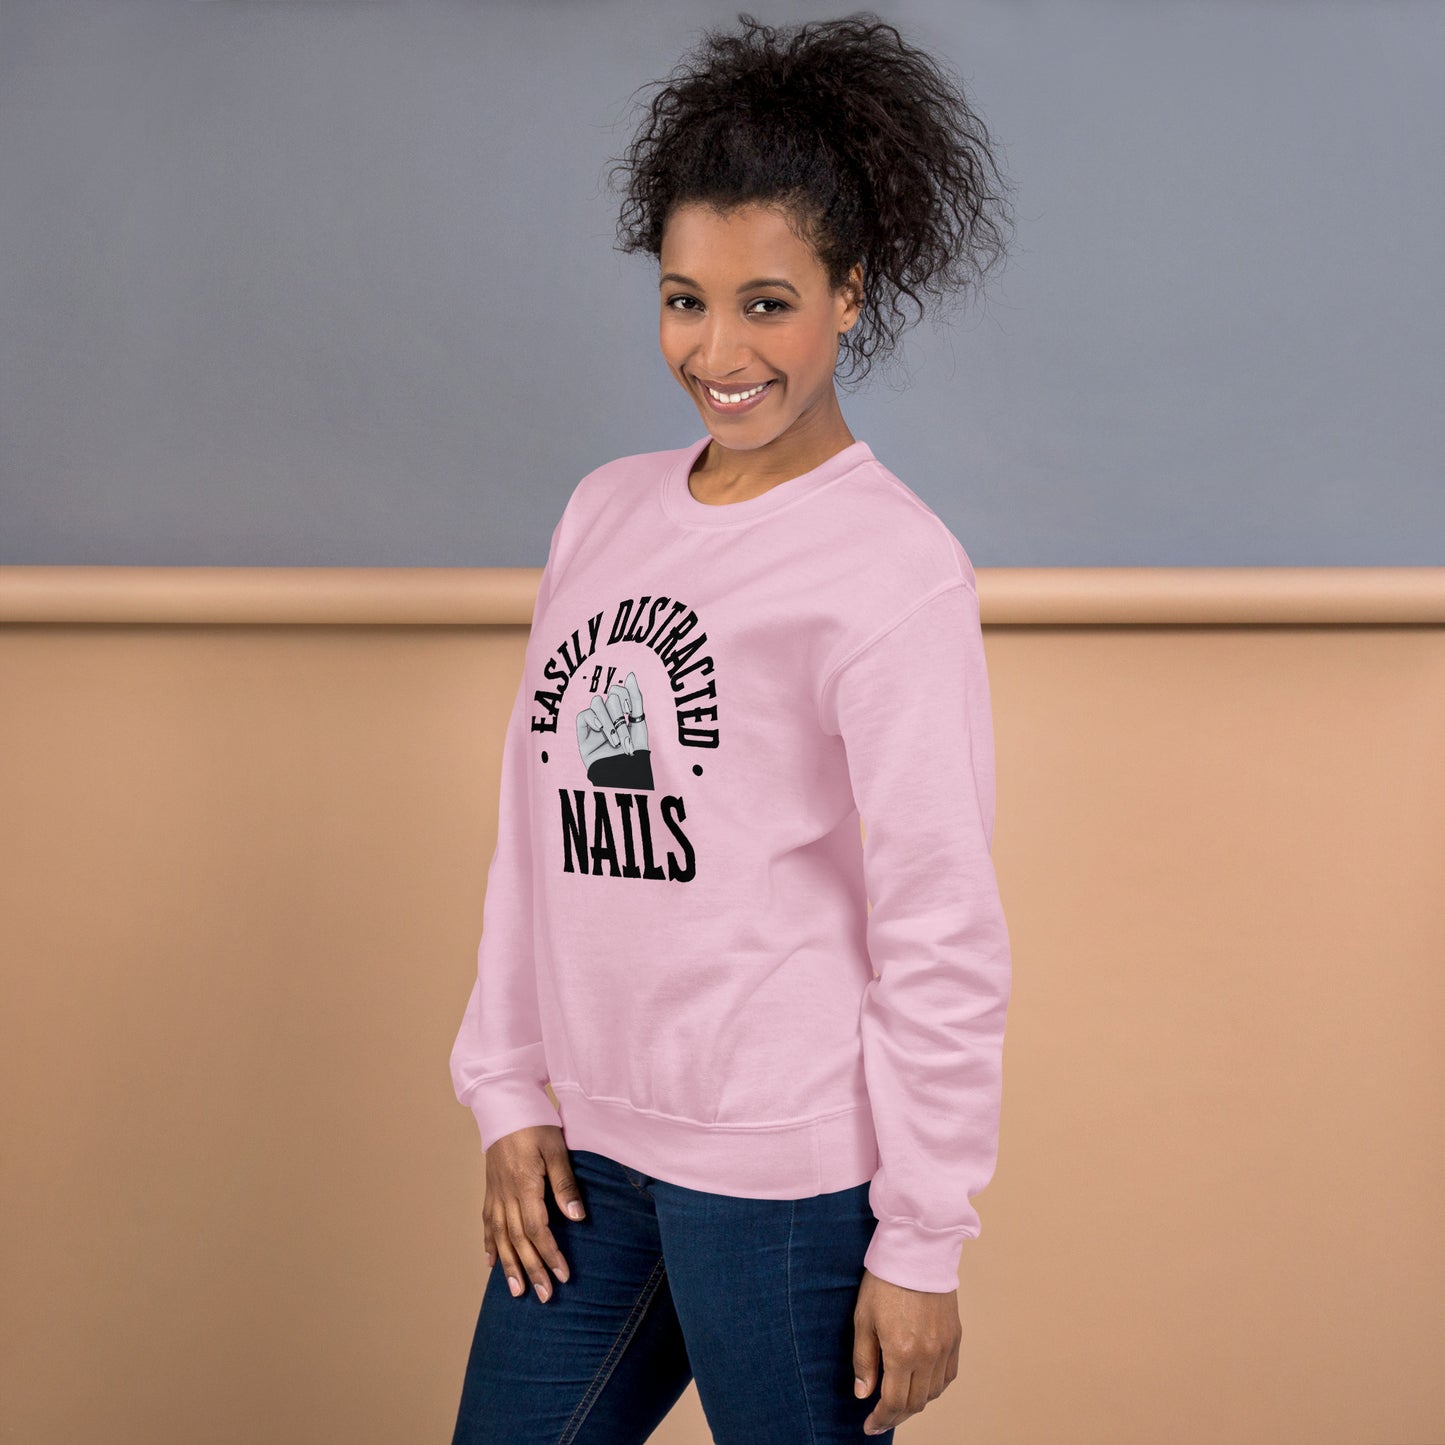 Easily Distracted by Nails Sweatshirt